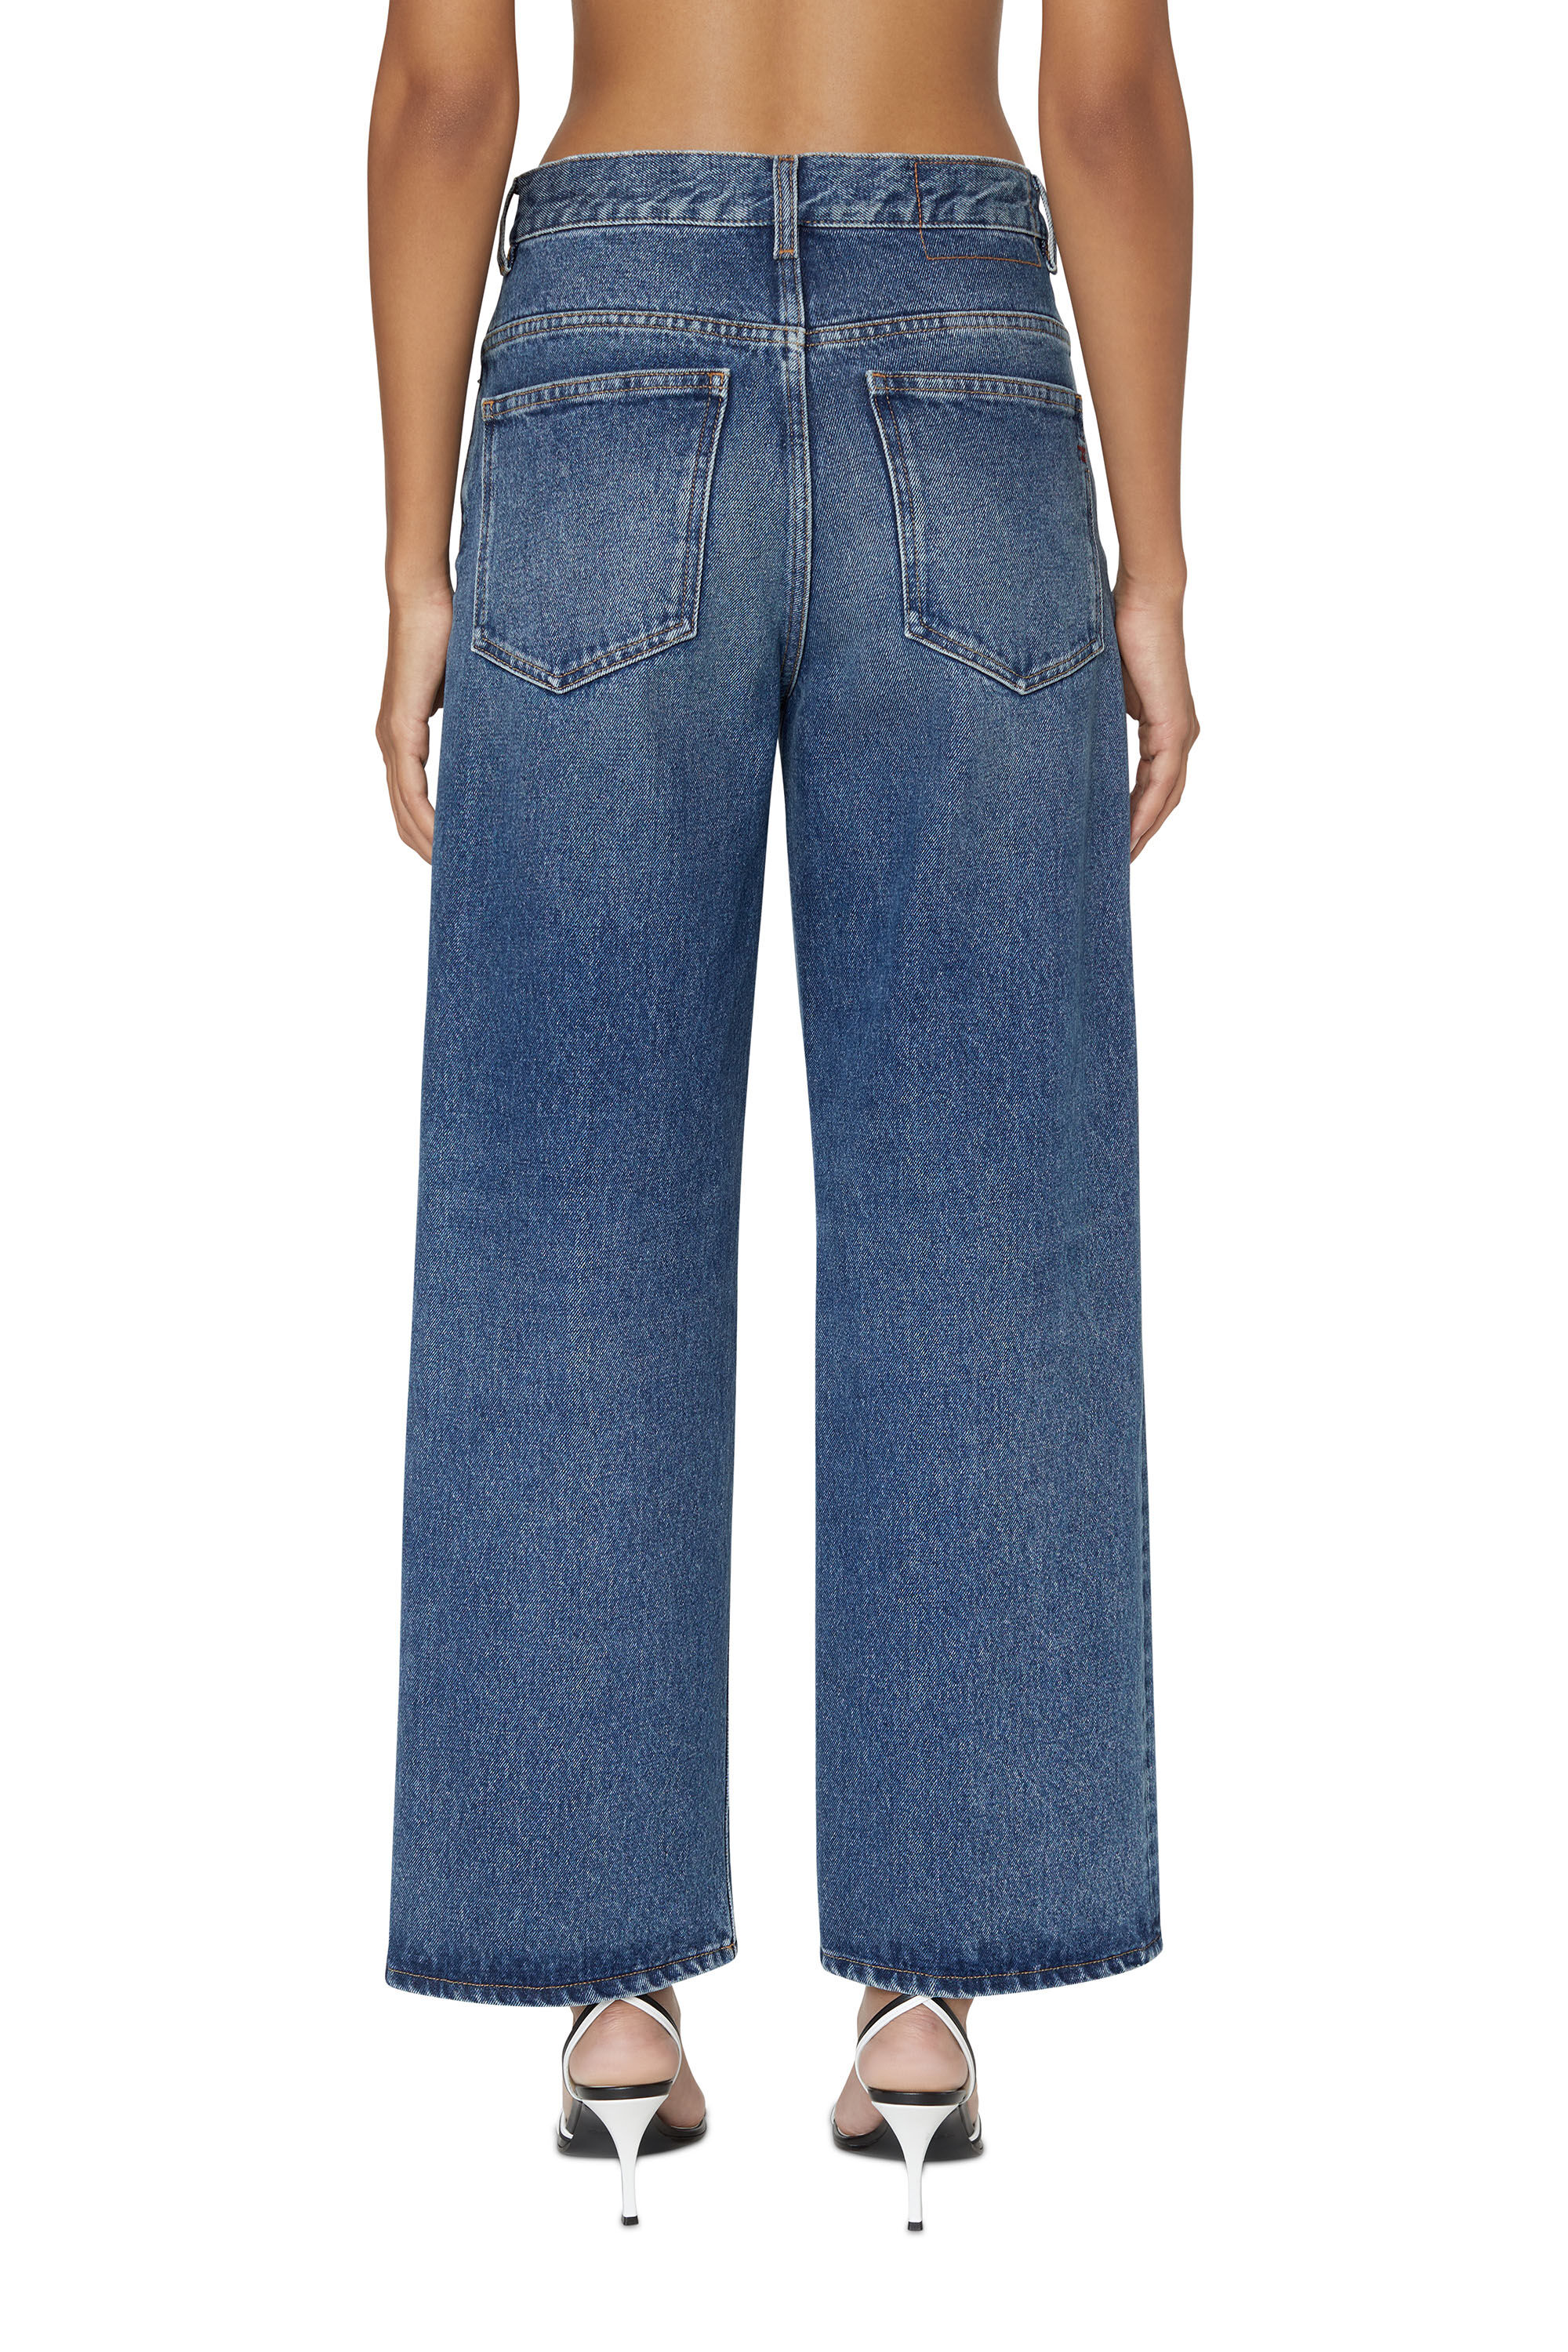 Diesel - 2000 Widee 007E5 Bootcut and Flare Jeans,  - Image 4